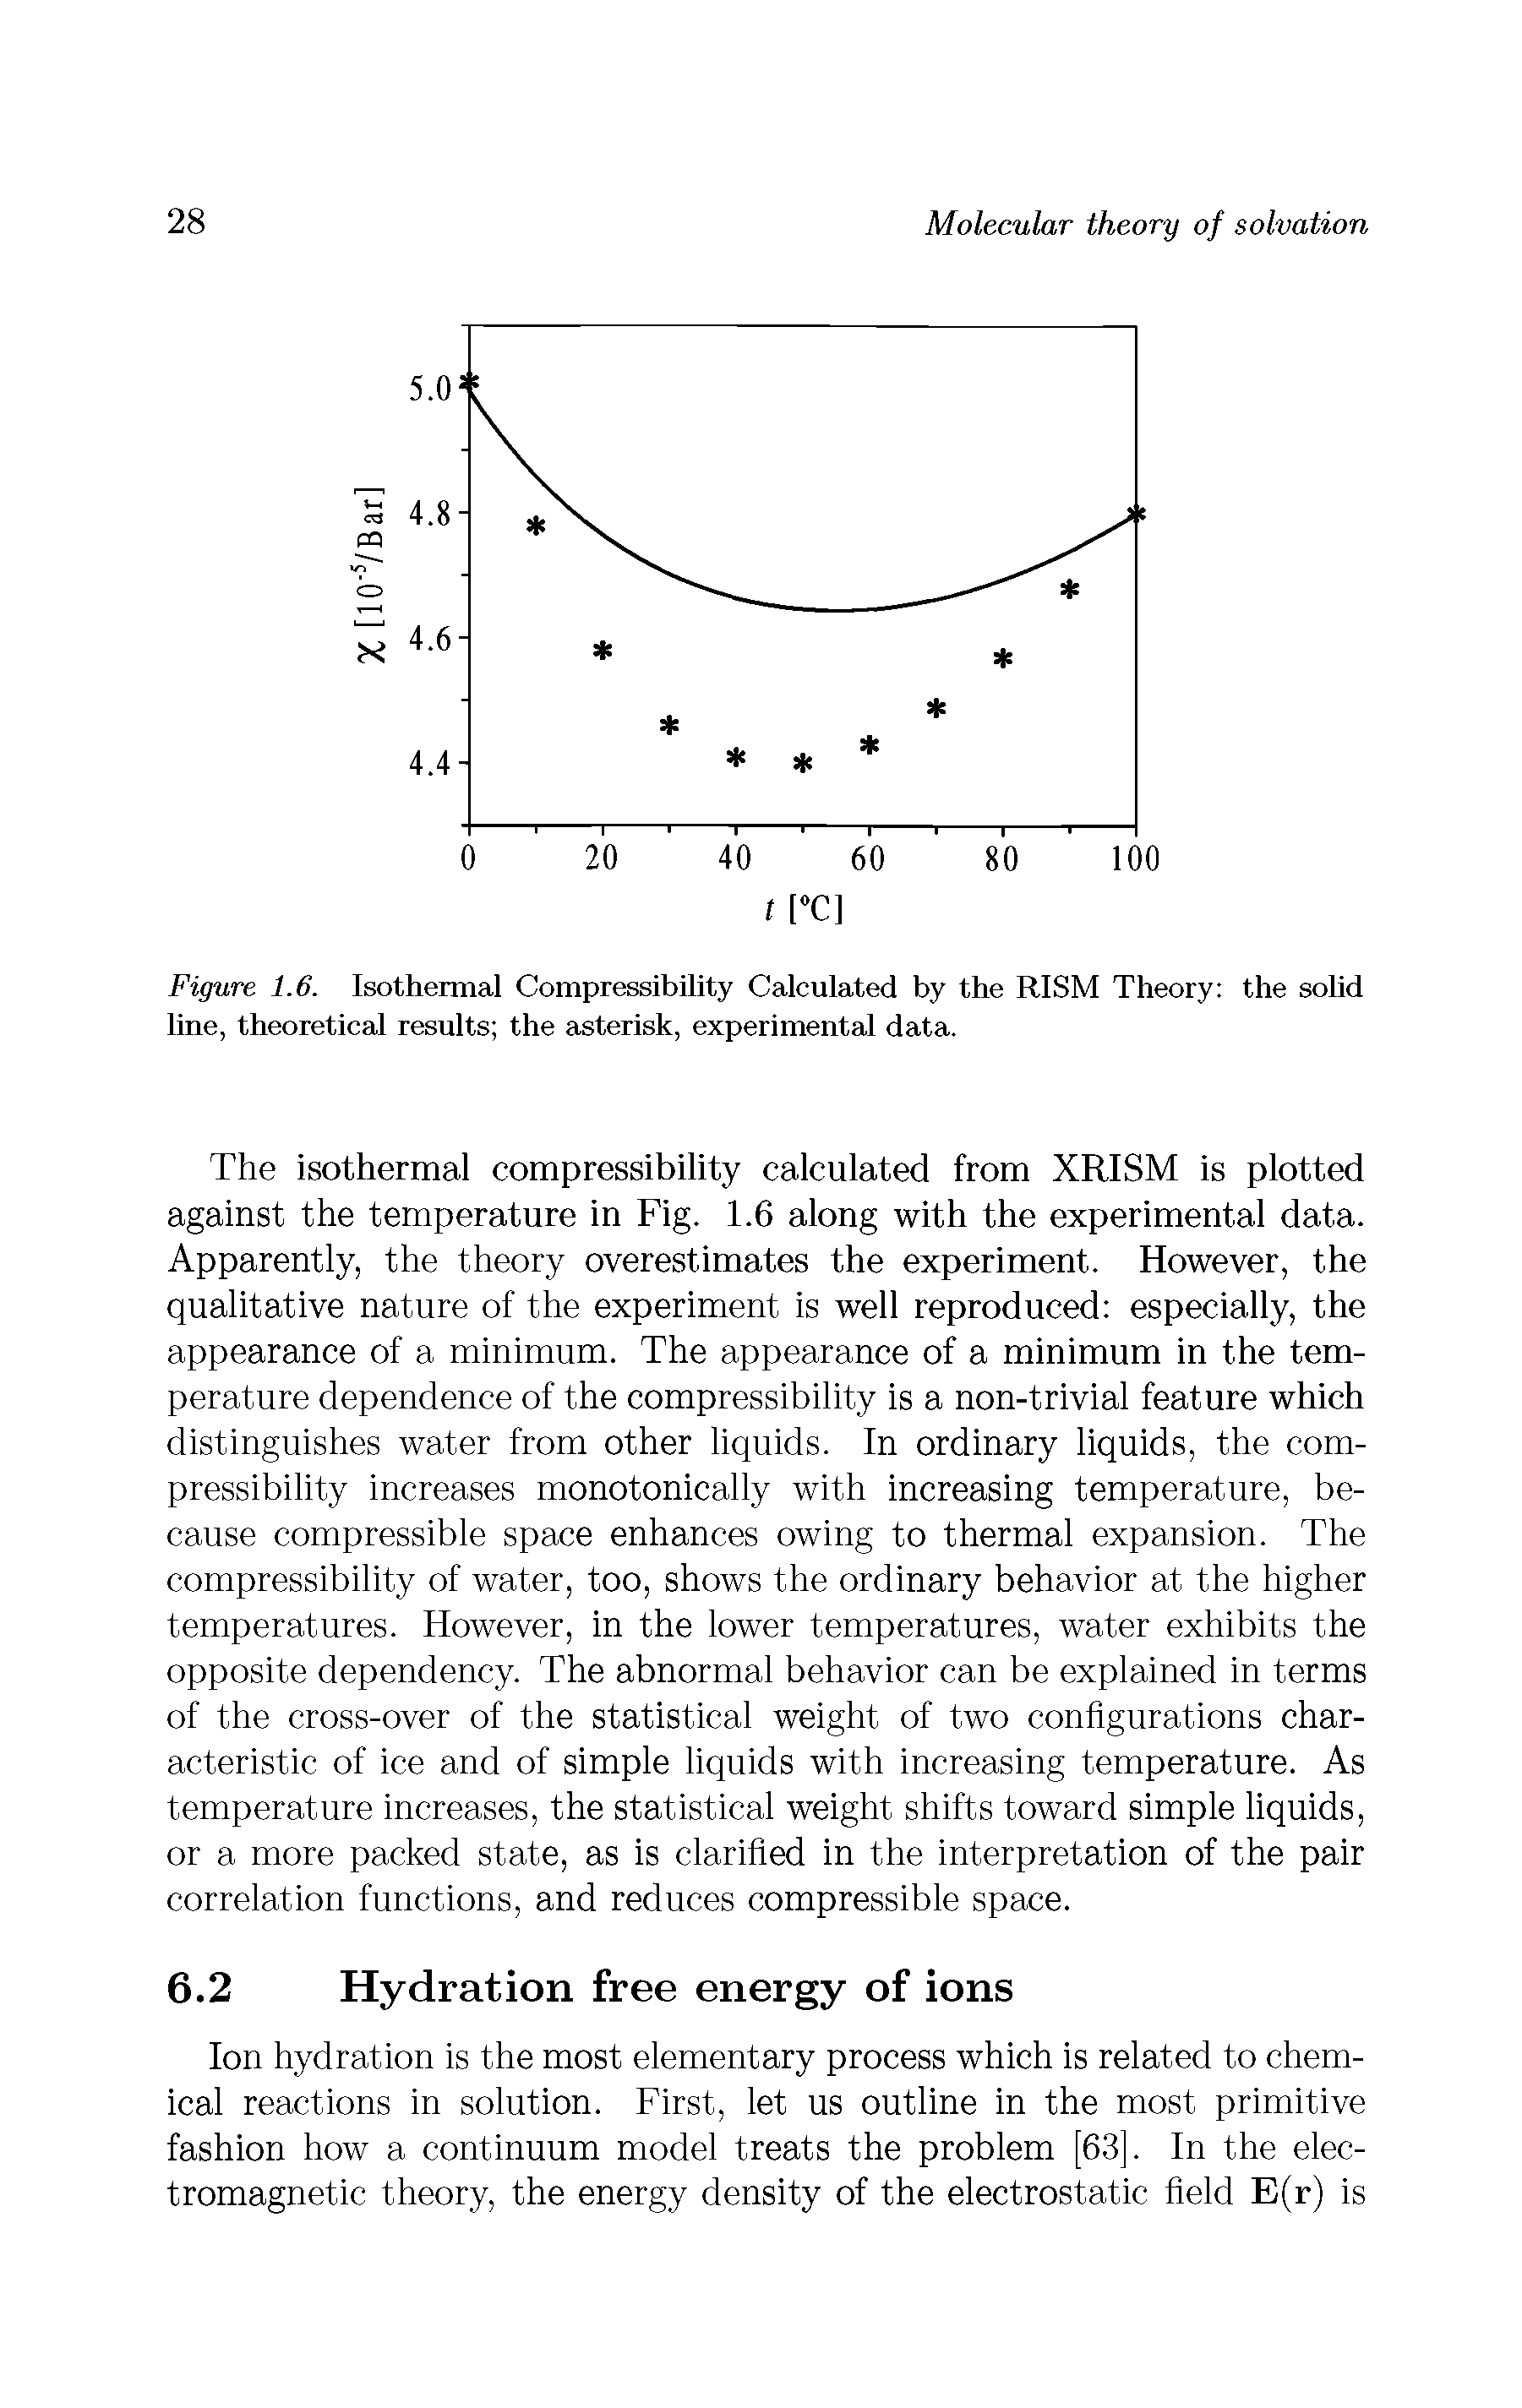 Figure 1.6. Isothermal Compressibility Calculated by the RISM Theory the sohd line, theoretical results the asterisk, experimental data.